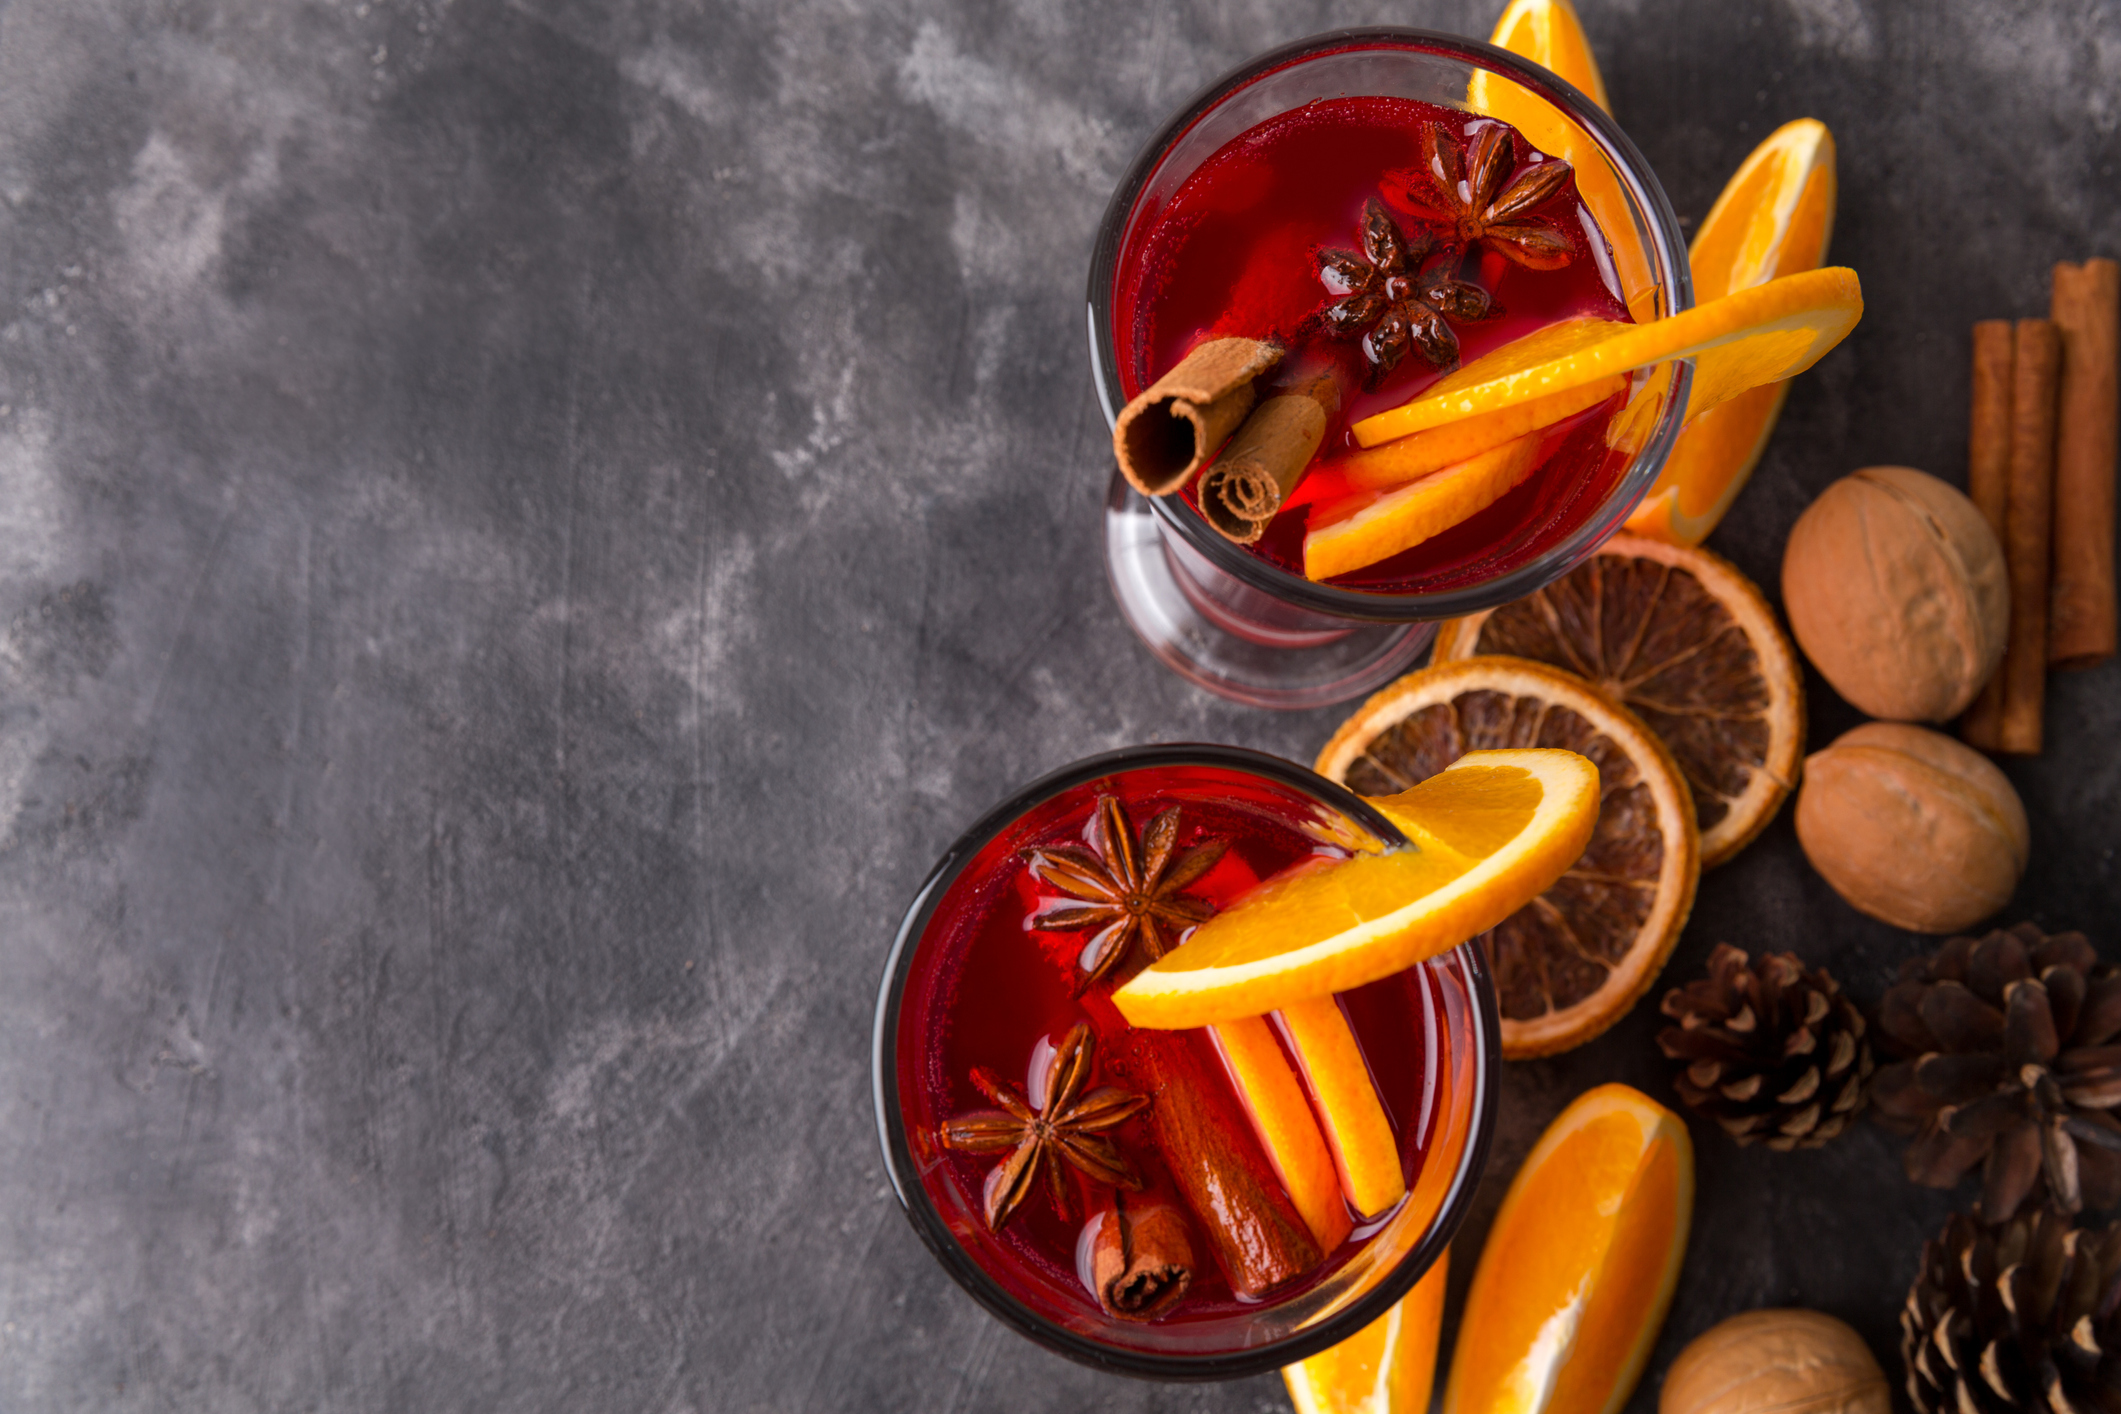 With soda, with juices or with fruit and vegetables: freedom of choice is one of the qualities of the aperitif